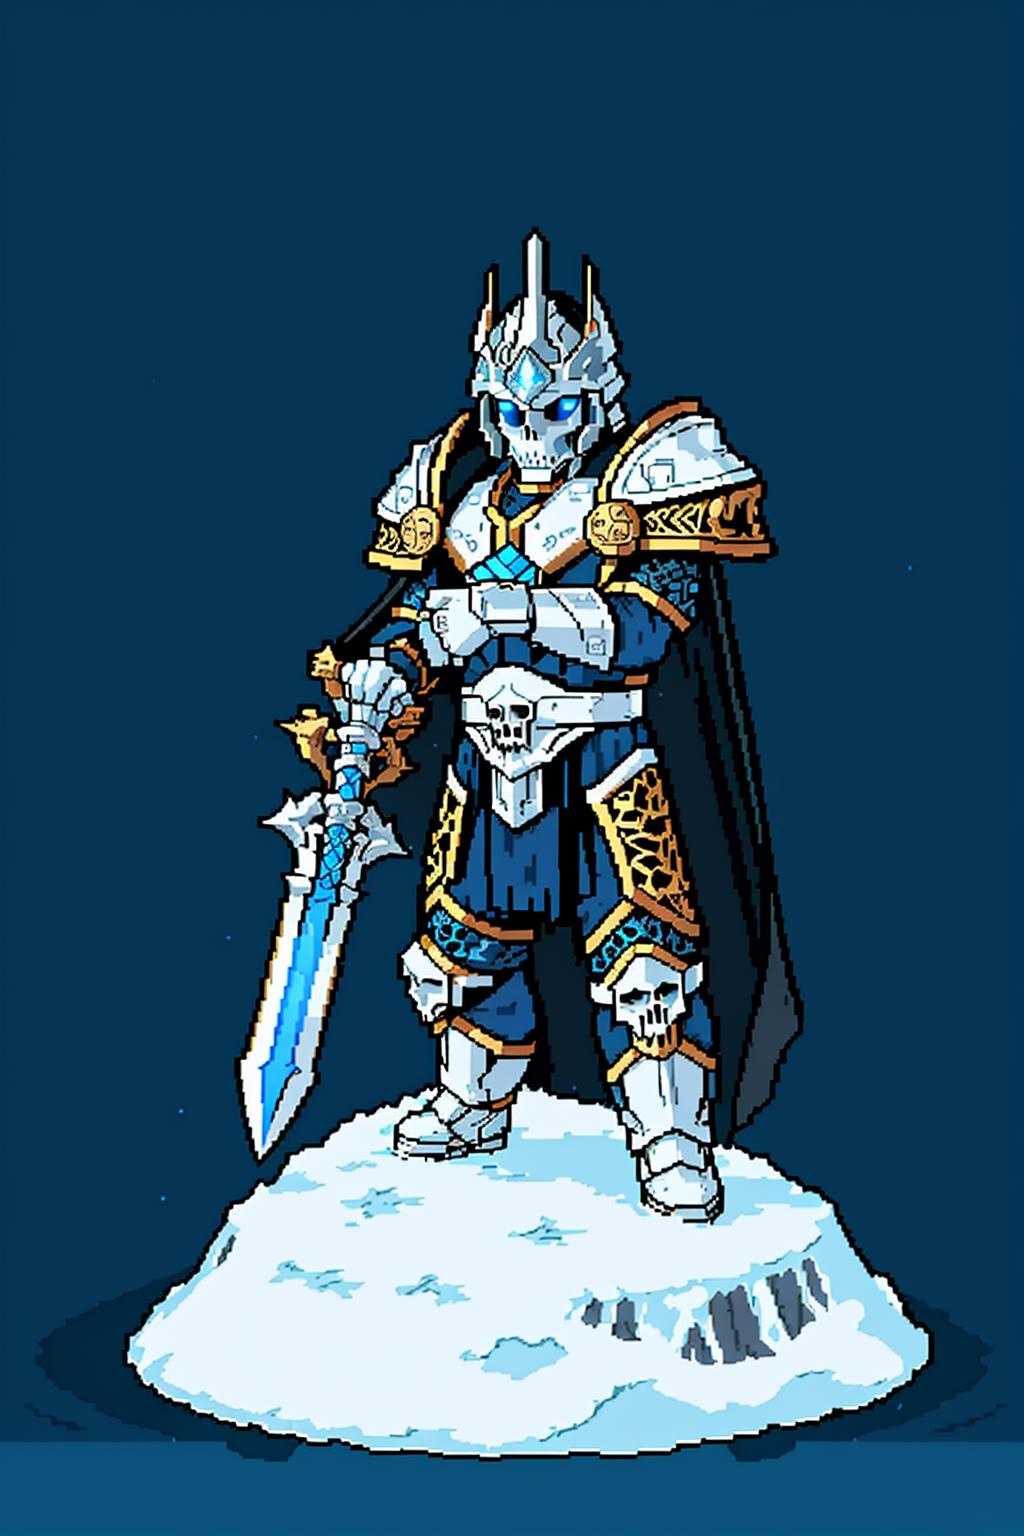 A digital illustration of a knight in white armor holding a sword.